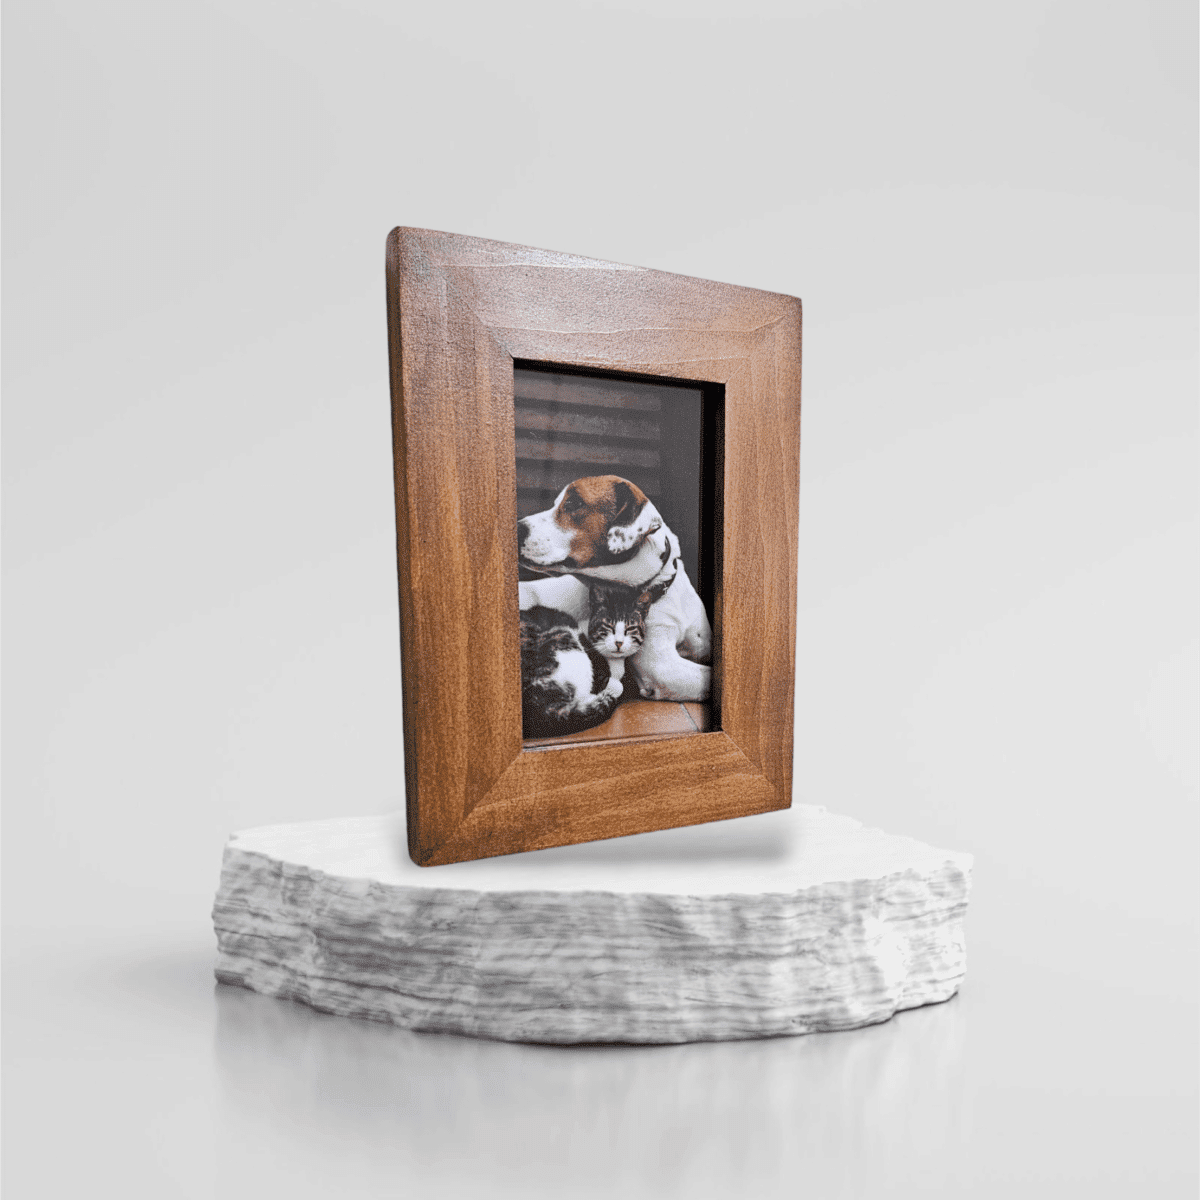 Golden oak stained handmade wooden picture frame